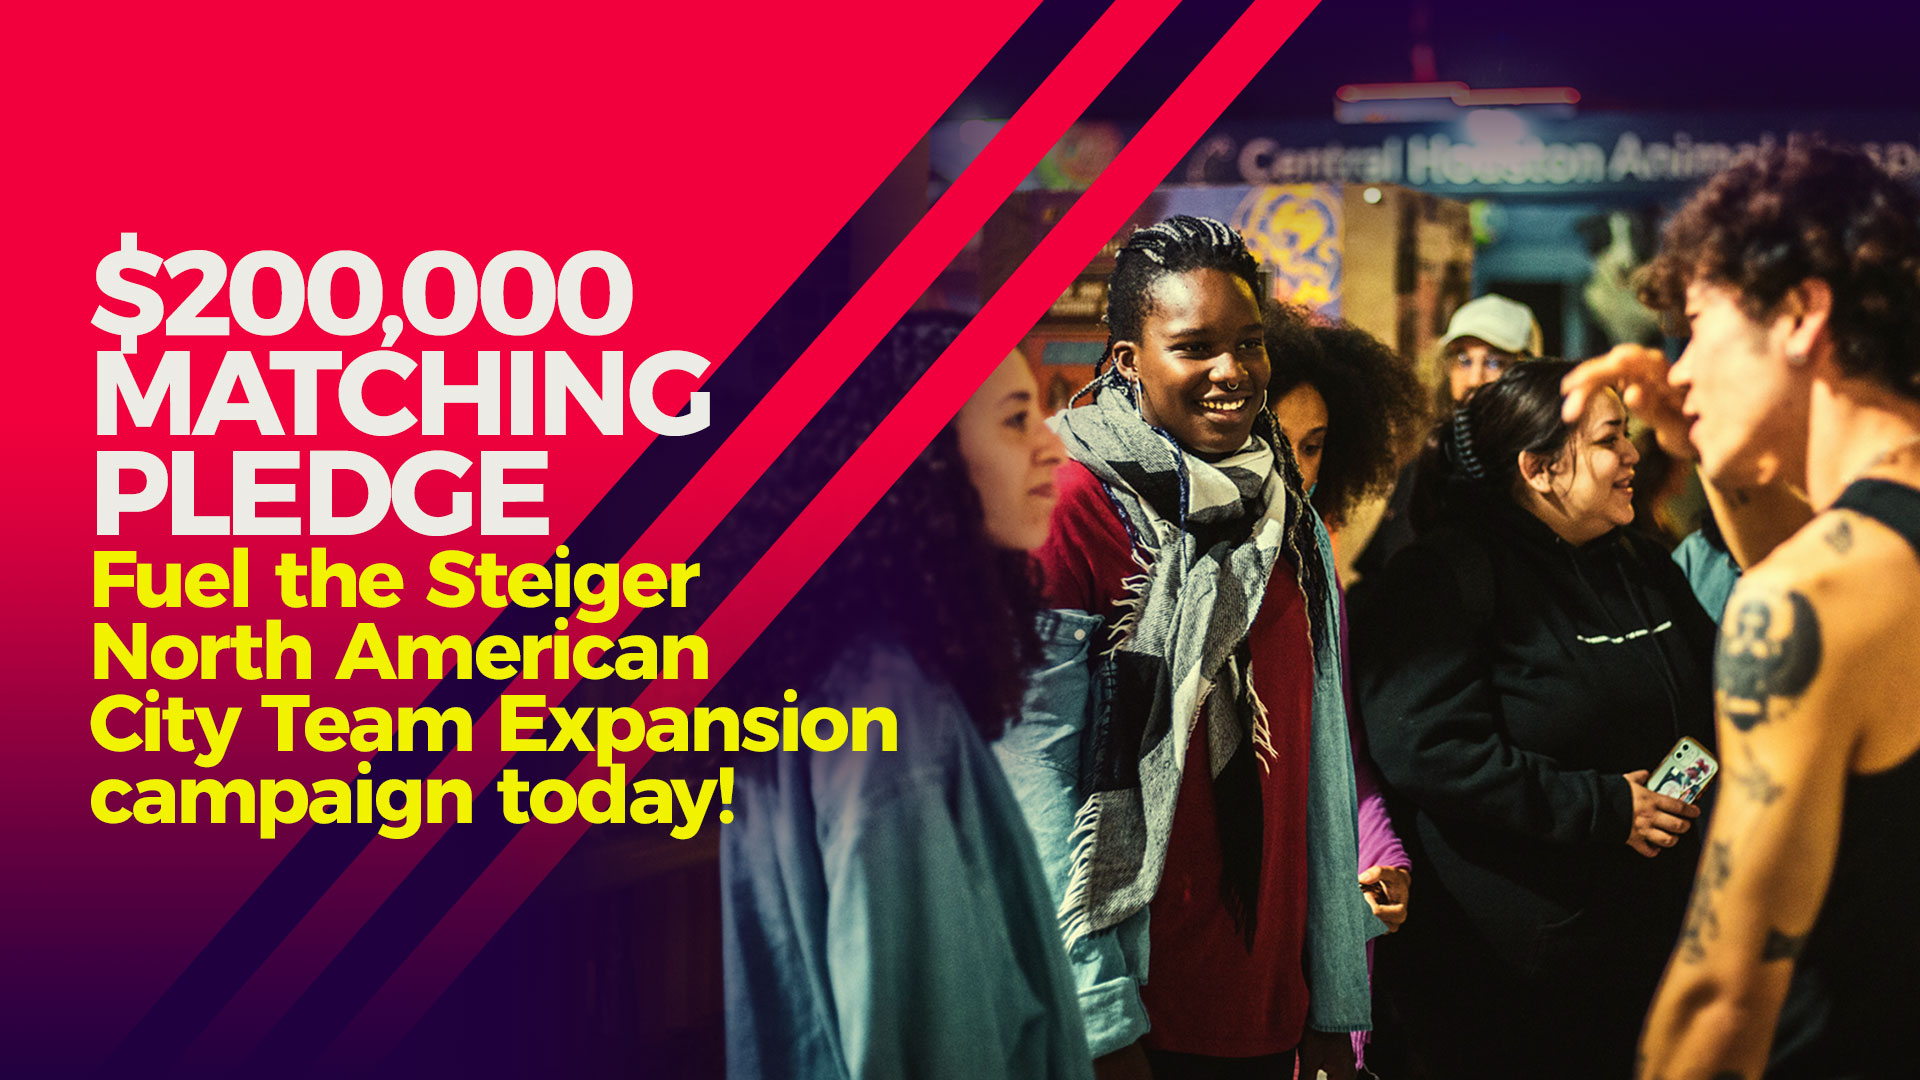 $200,000 matching pledge Fuel the Steiger North American City Team Expansion campaign today!